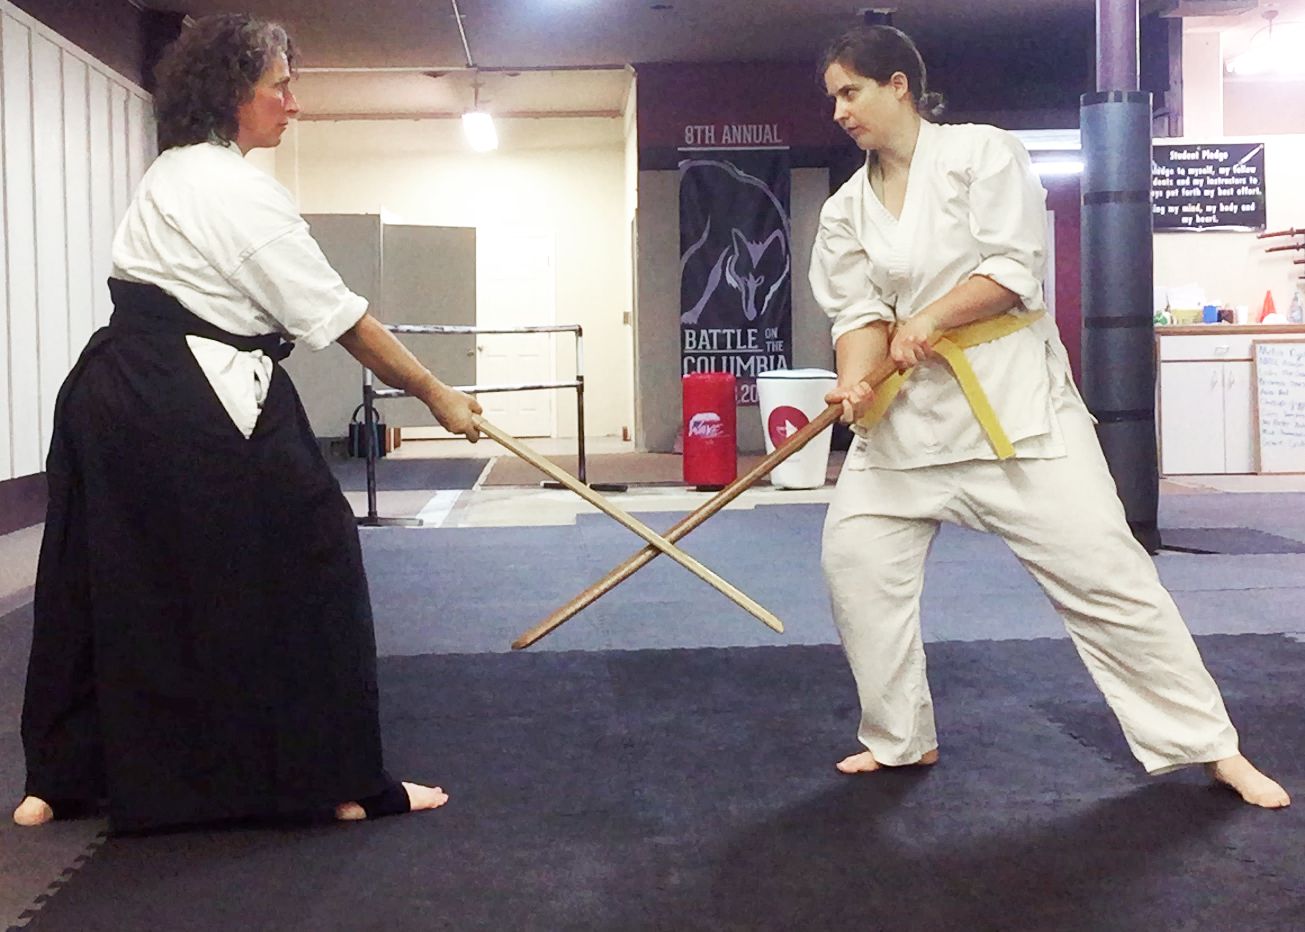 Aikido: The martial art of peace